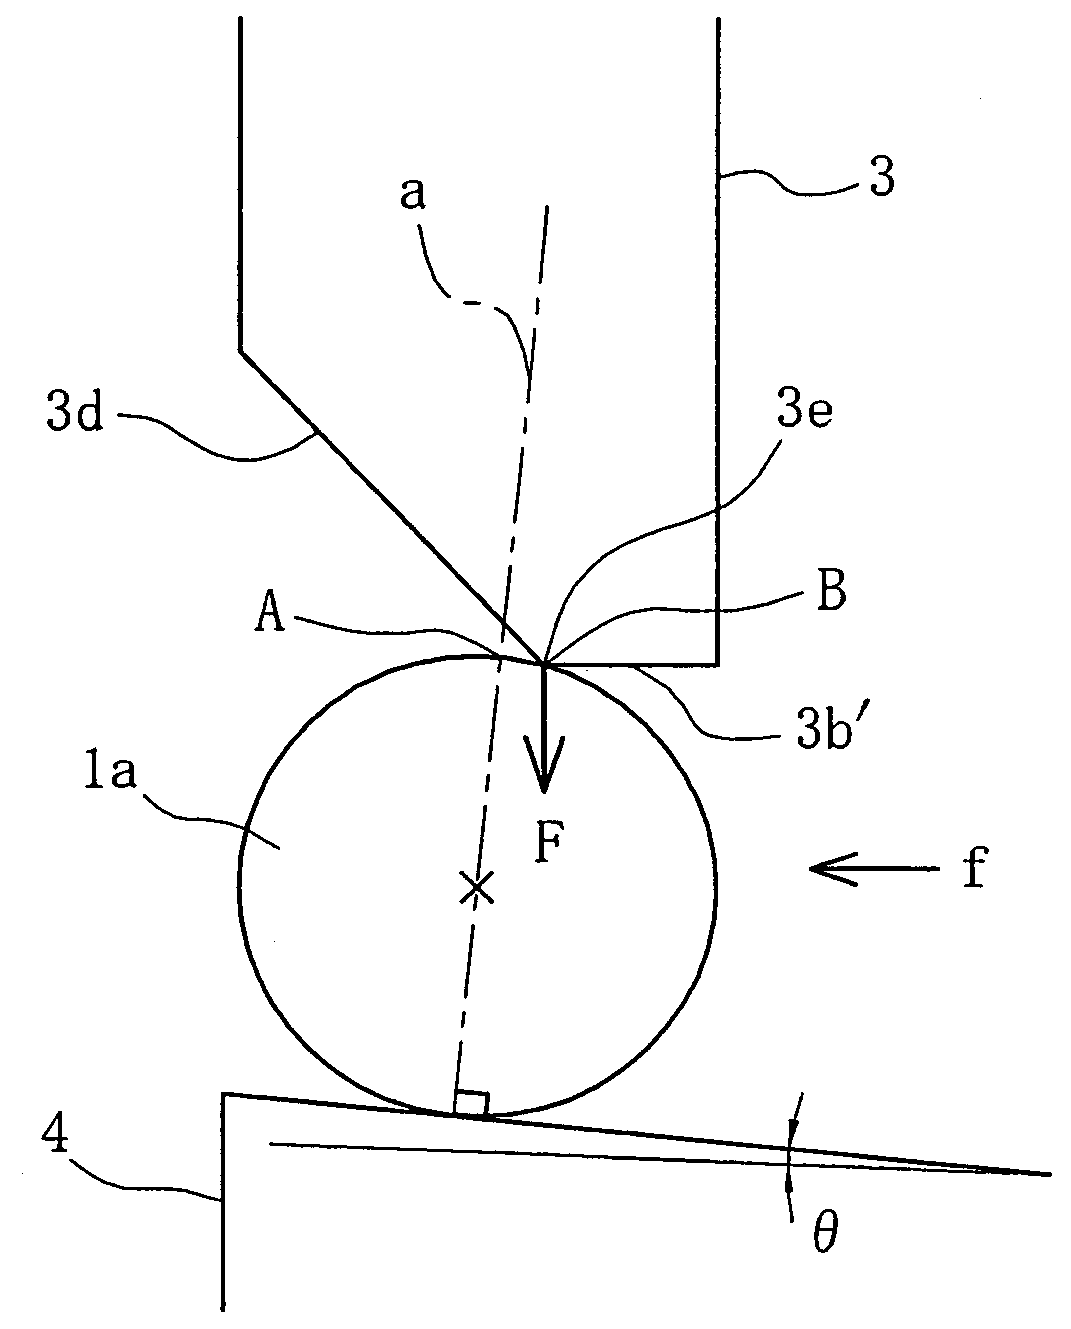 Surgical stapler with sound producing mechanism to signal the completion of the stapling process